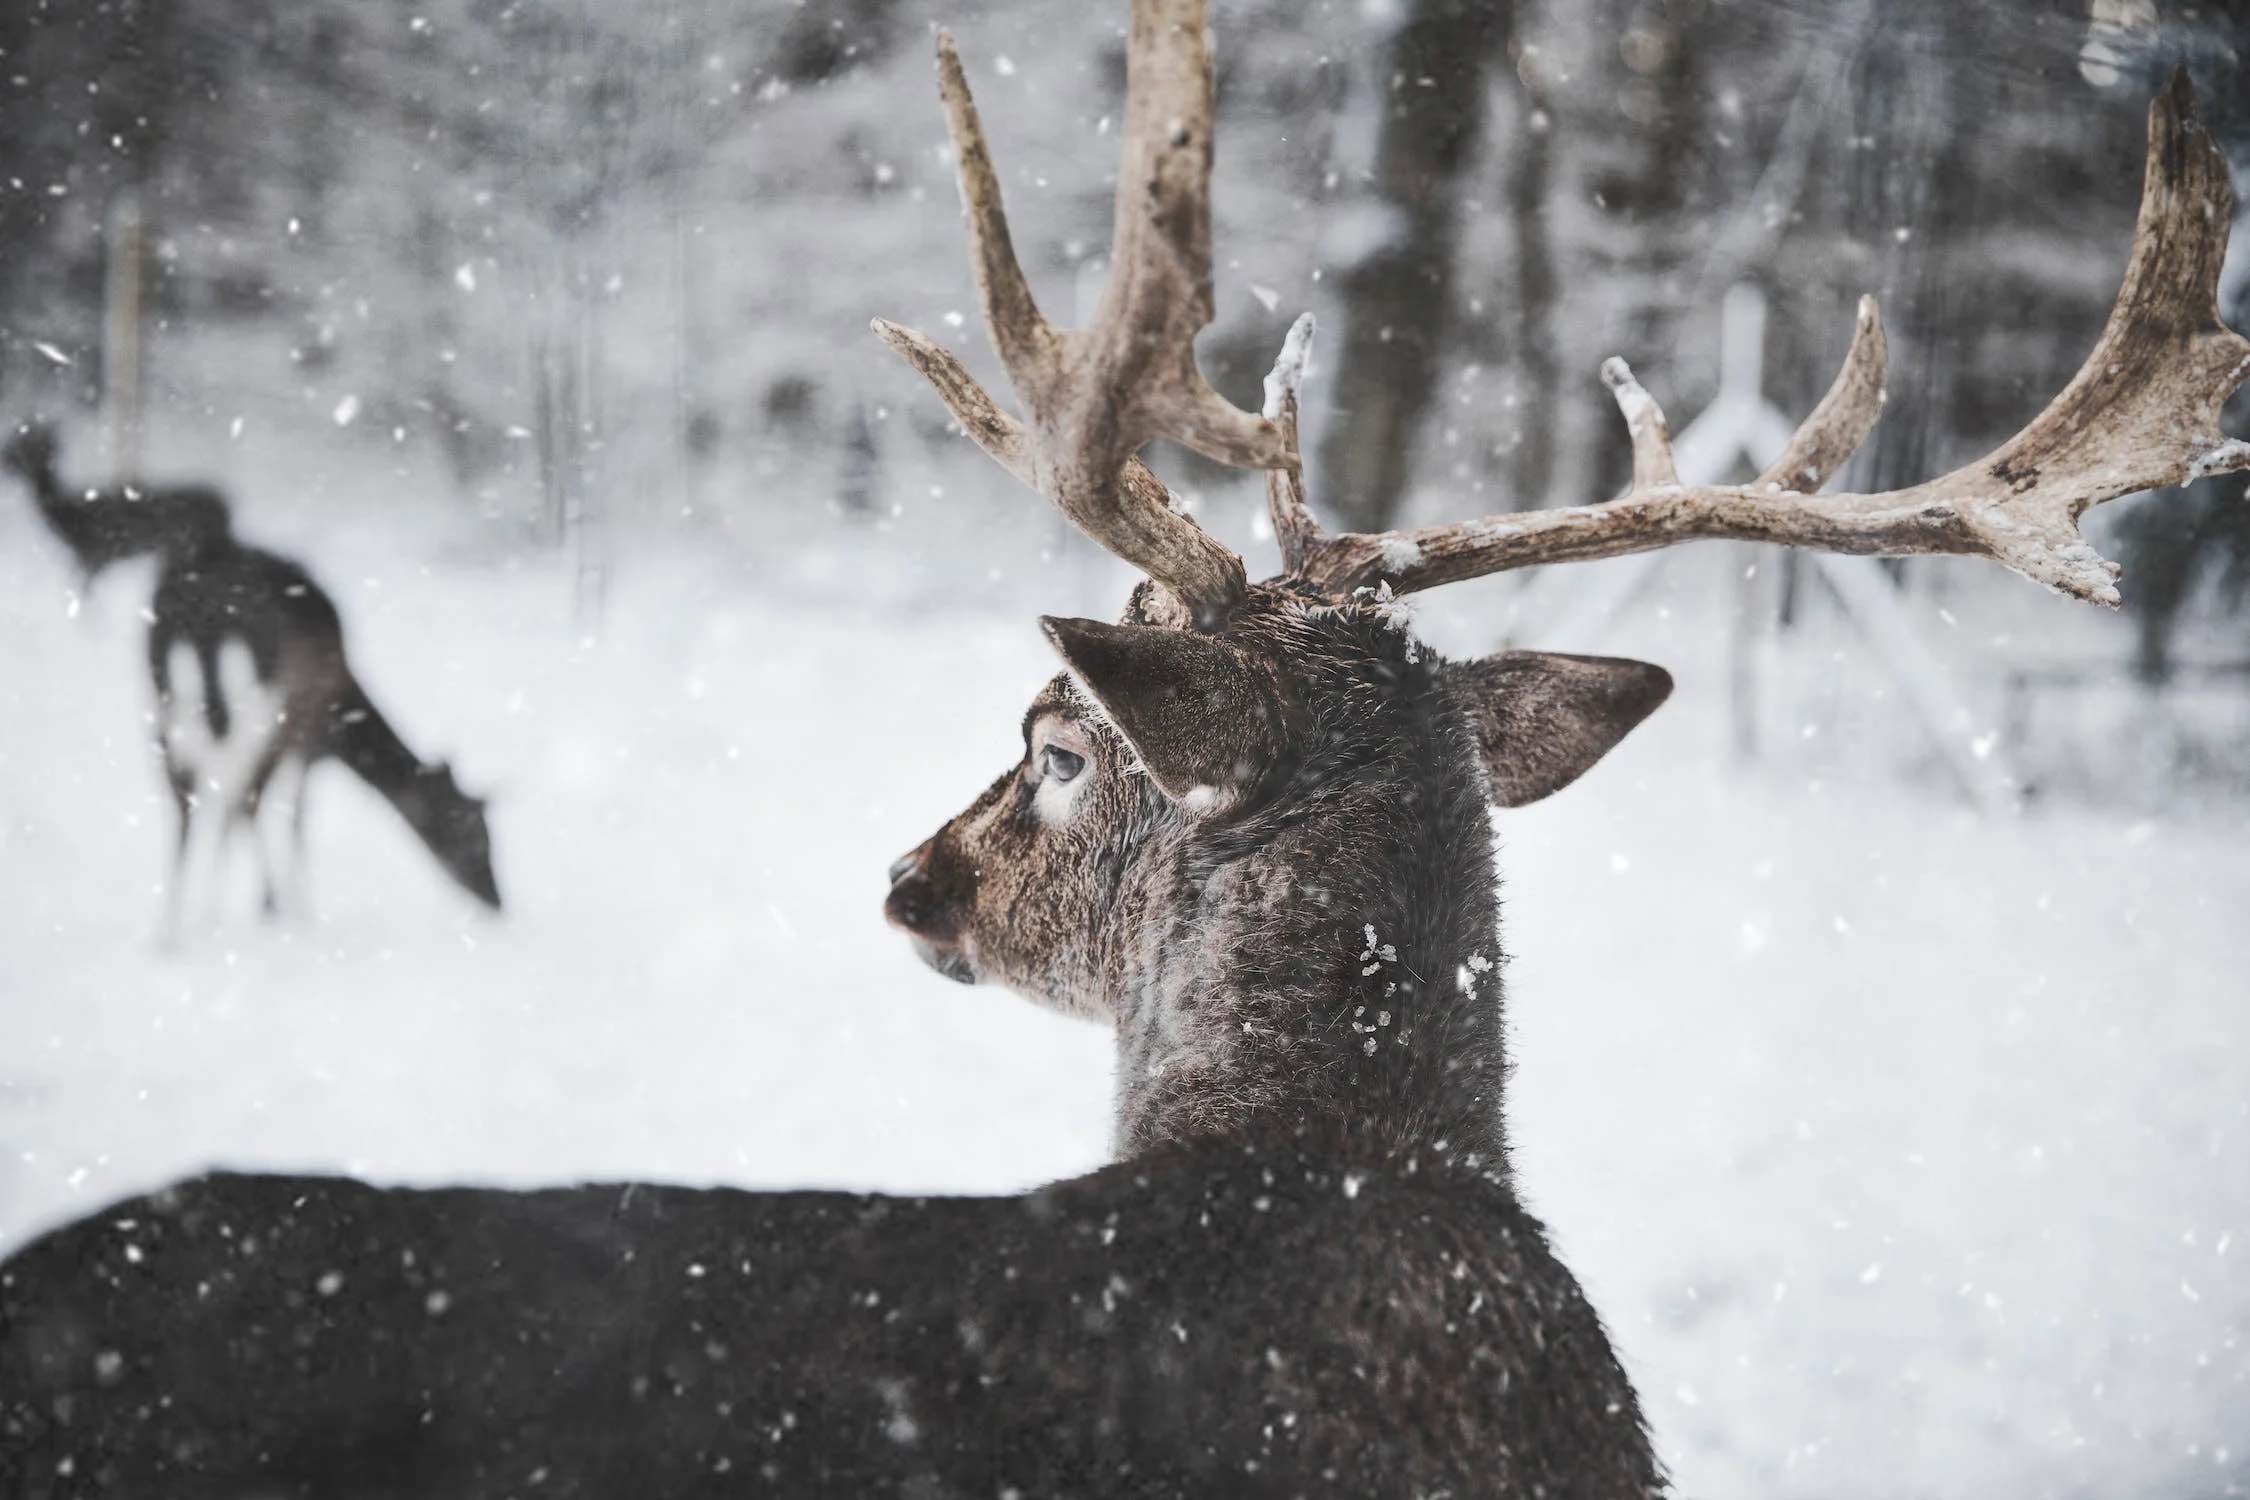 ‘Zombie deer disease’ epidemic spreads in Yellowstone as scientists raise fears it may jump to humans